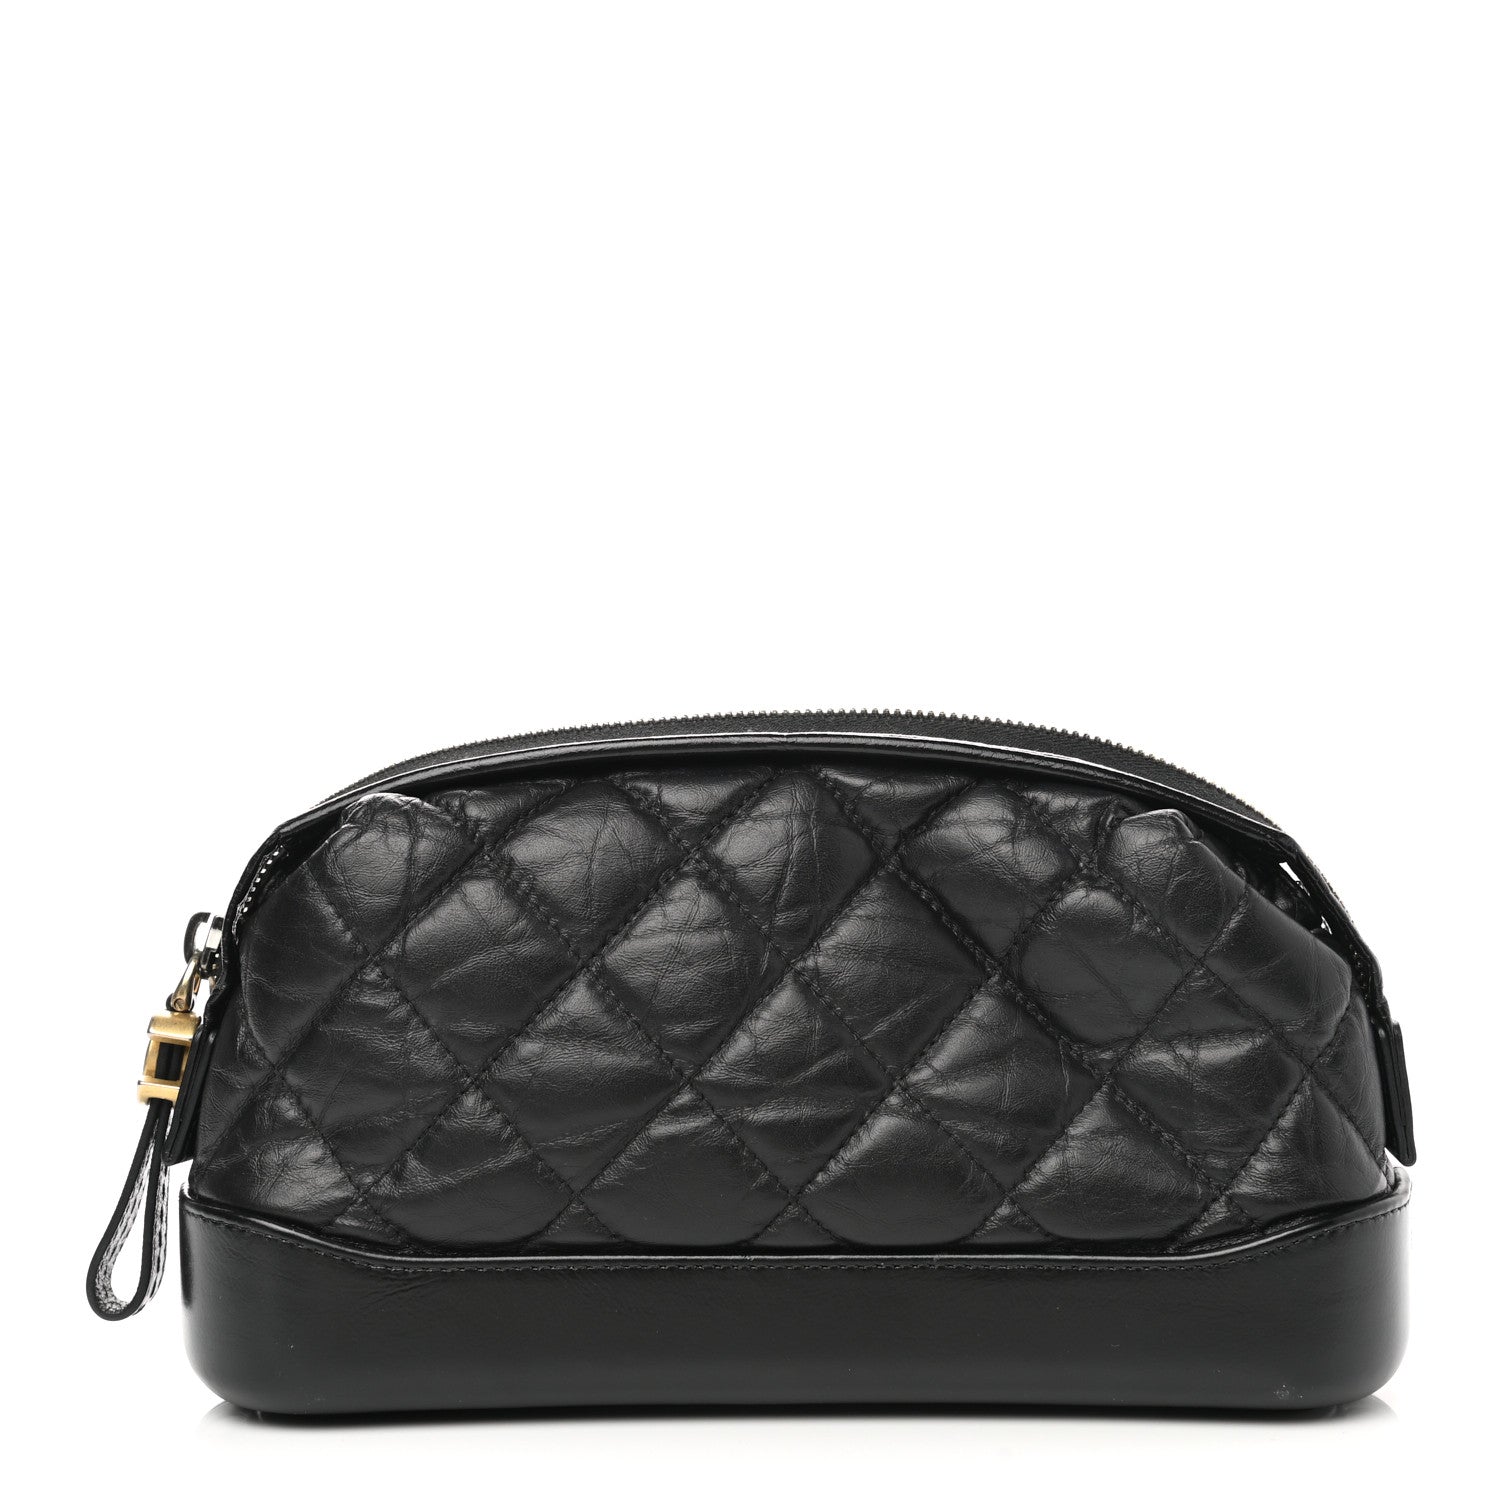 Chanel Black Quilted Aged Calfskin Gabrielle Cosmetics Case Gold